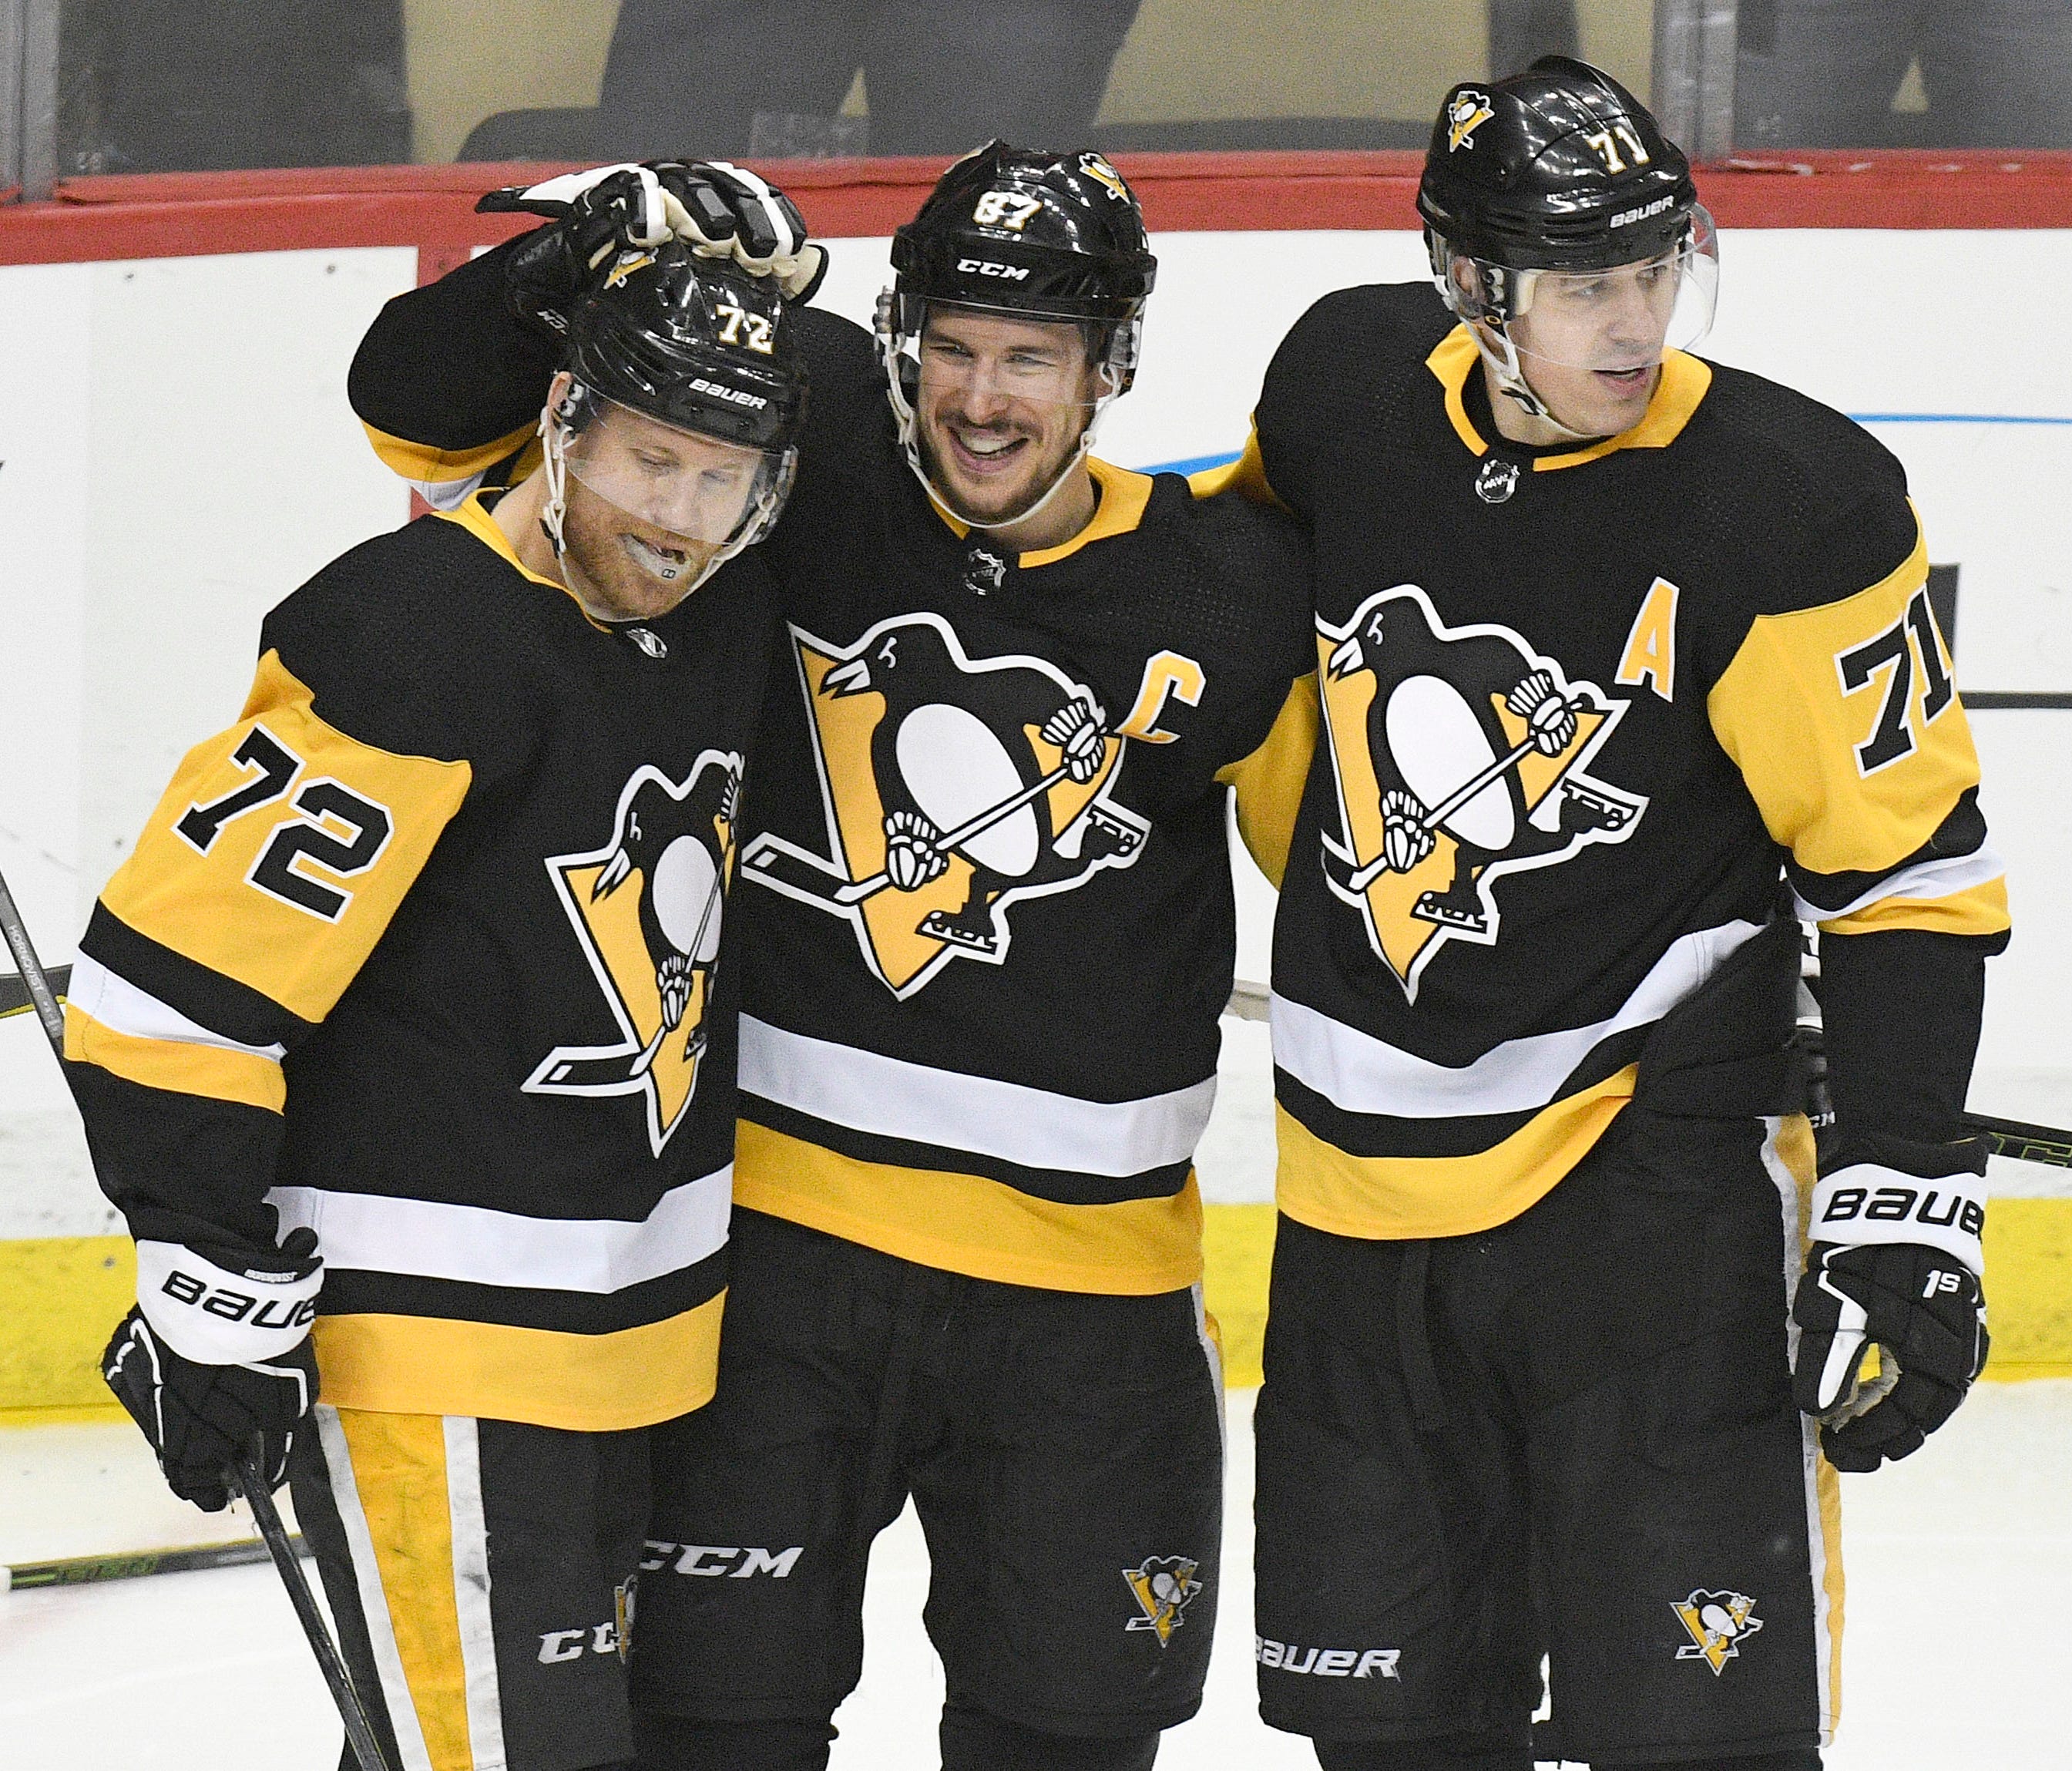 Pittsburgh Penguins right wing Patric Hornqvist (left) Sidney Crosby (center) and Evgeni Malkin (right) celebrate after Crosby scored a goal against the Ottawa Senators in the second period of an NHL game at PPG PAINTS Arena.